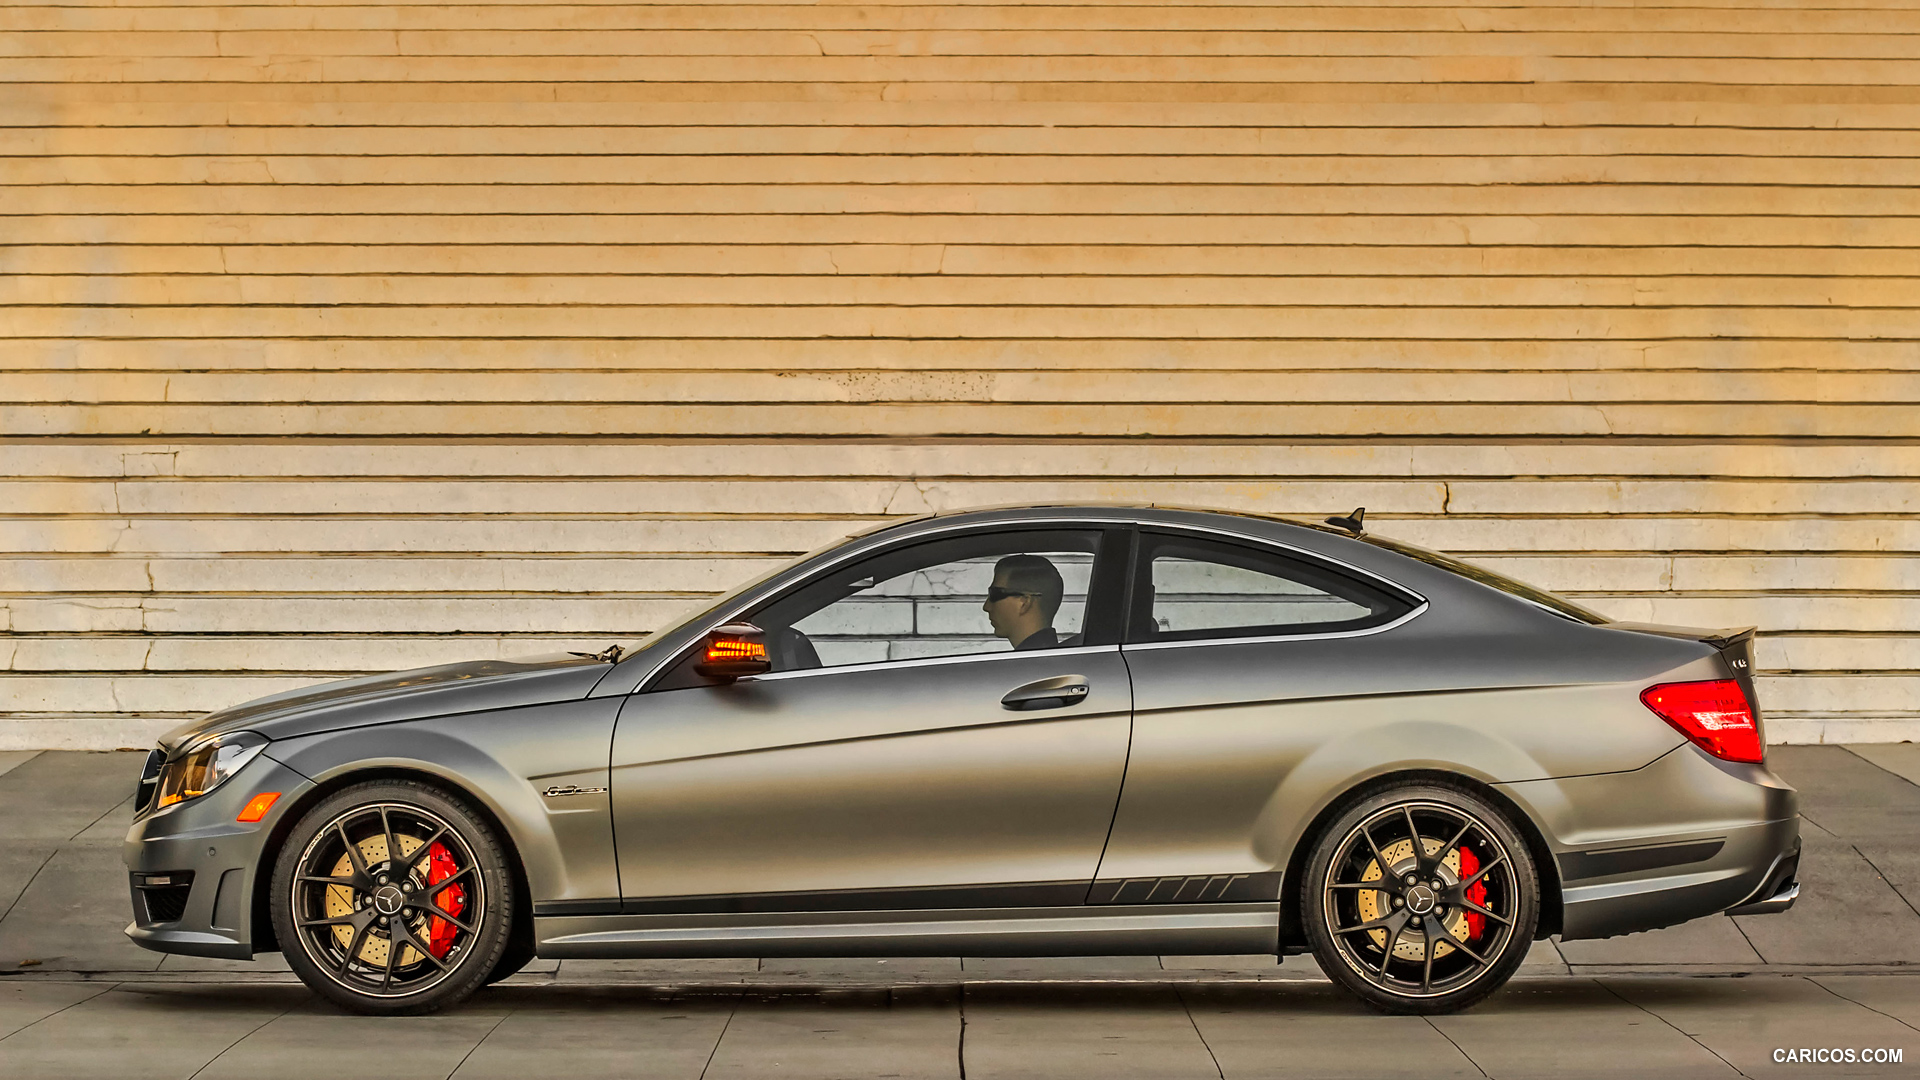 2014 Mercedes-Benz C 63 AMG Edition 507 Coupe (US Version)  - Side, #3 of 14